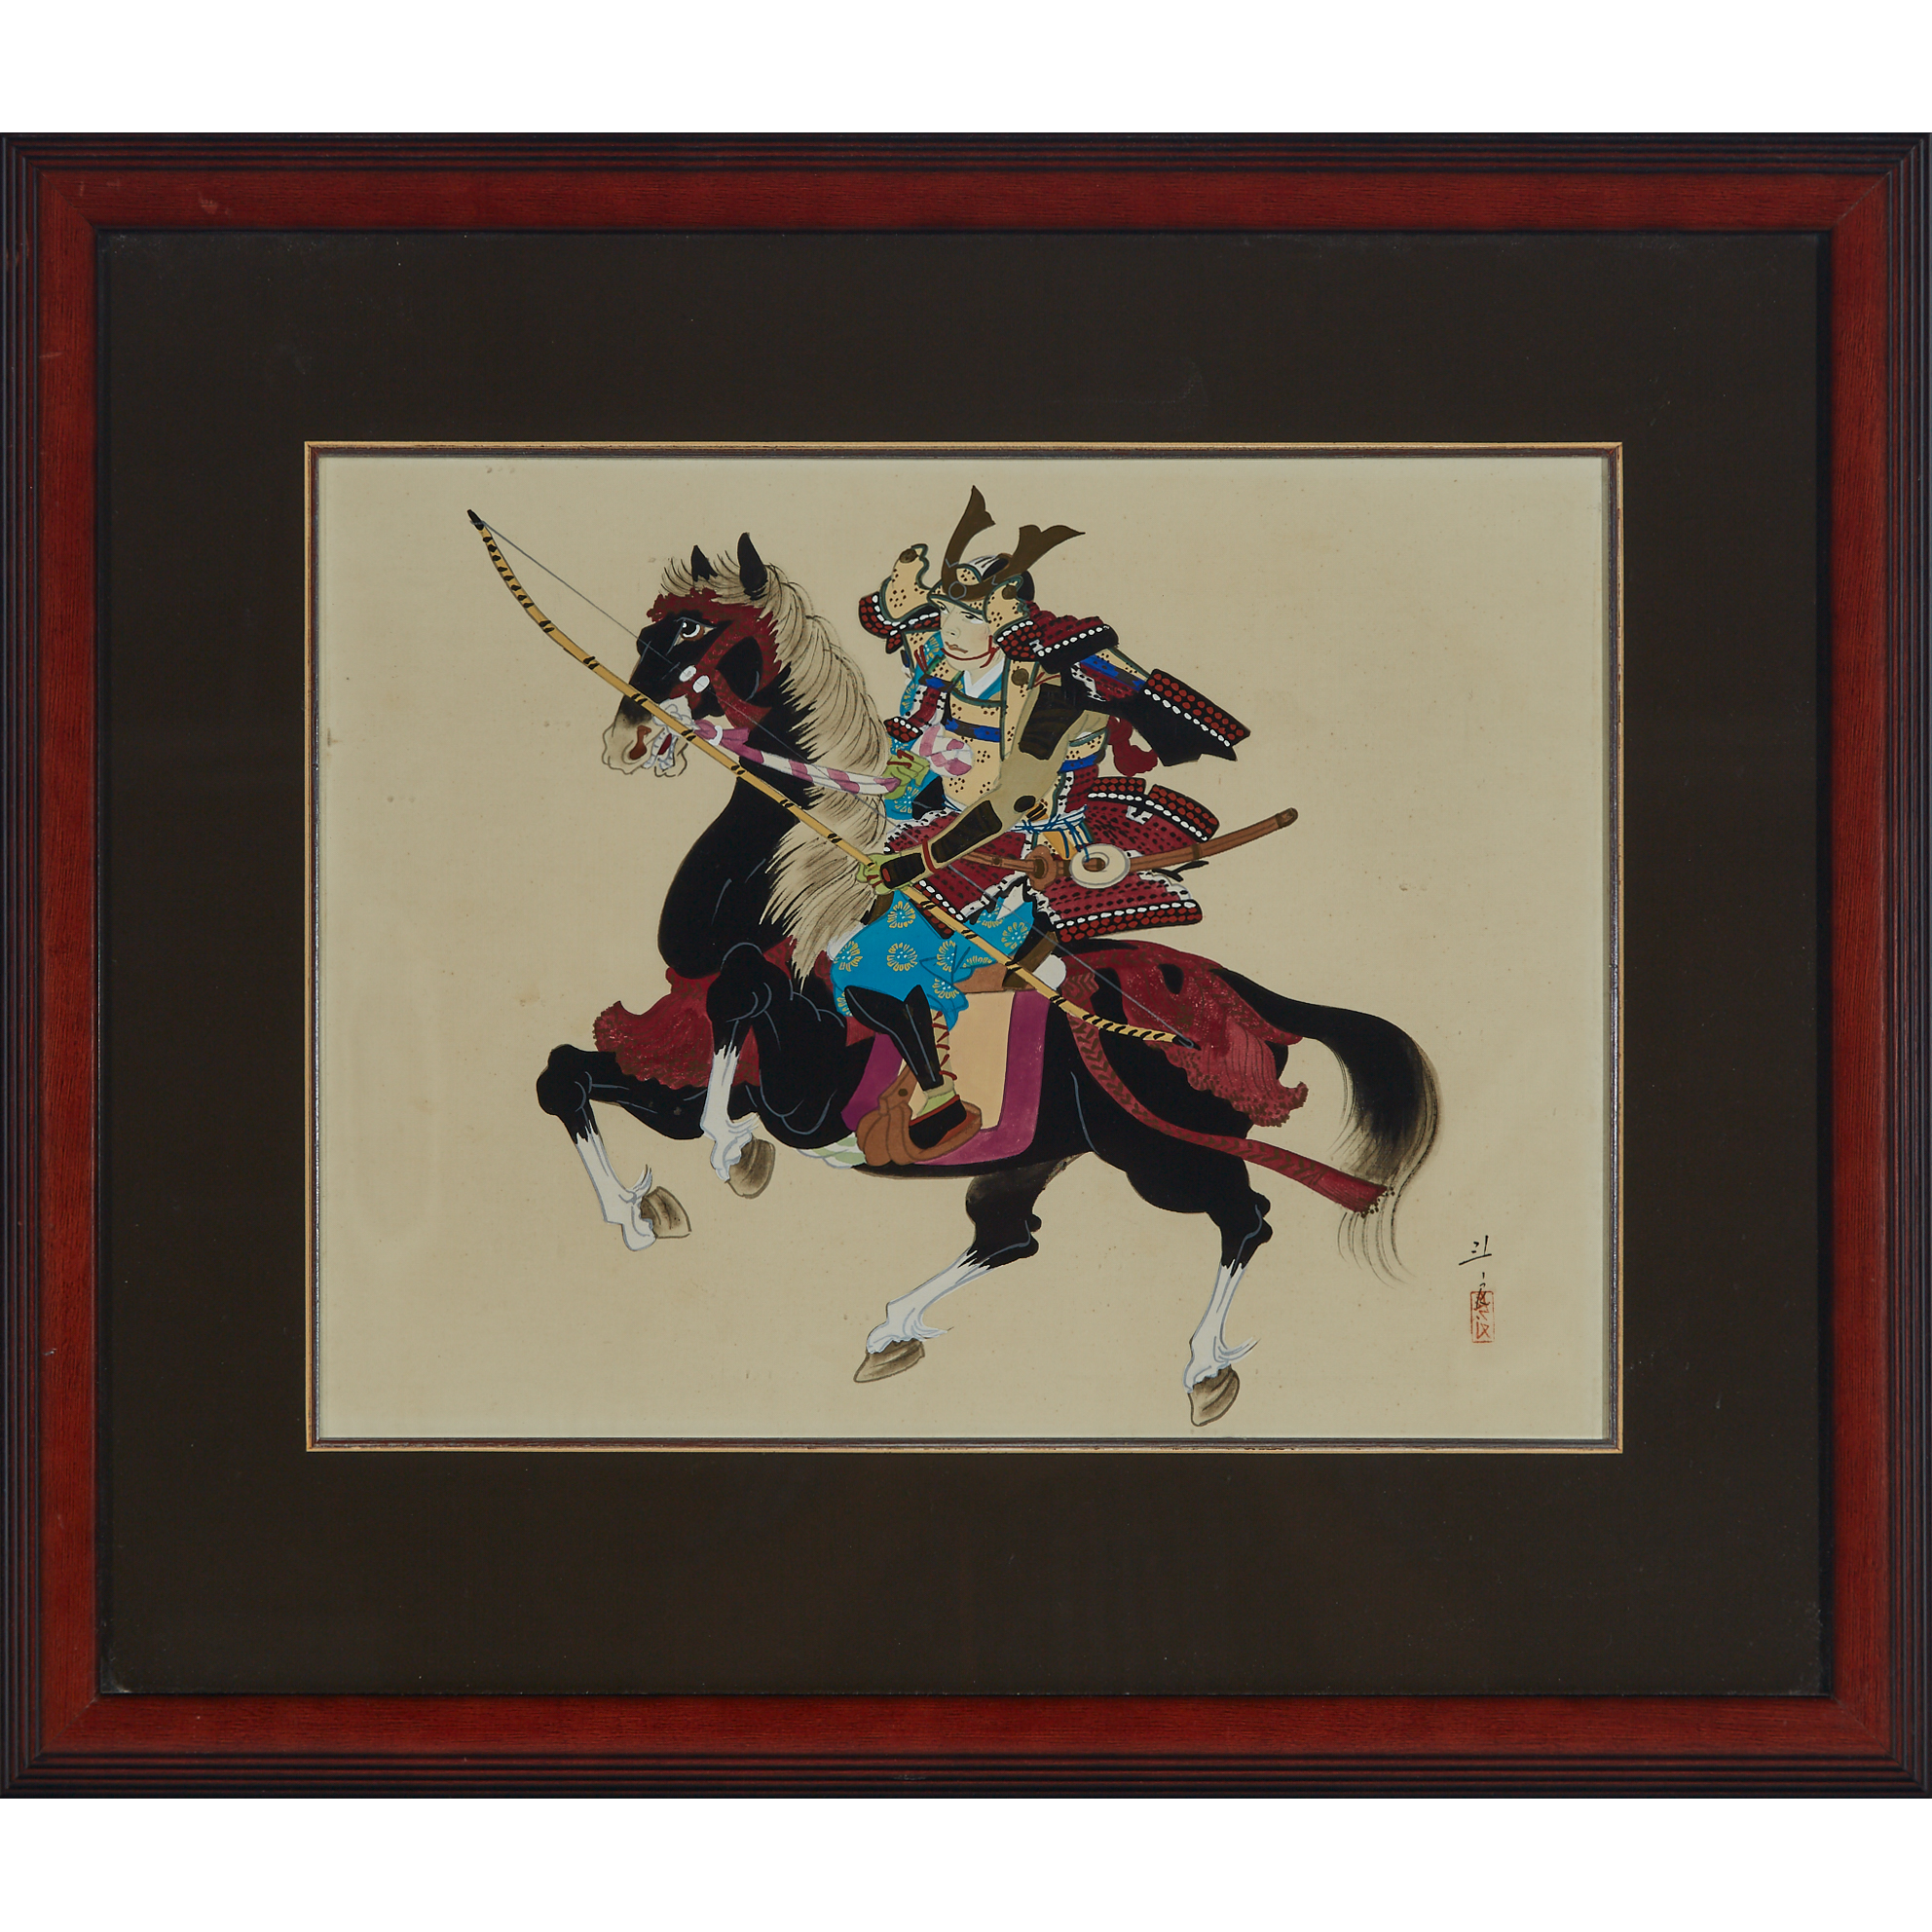 A Painting of a Mounted Samurai with Bow and Arrow